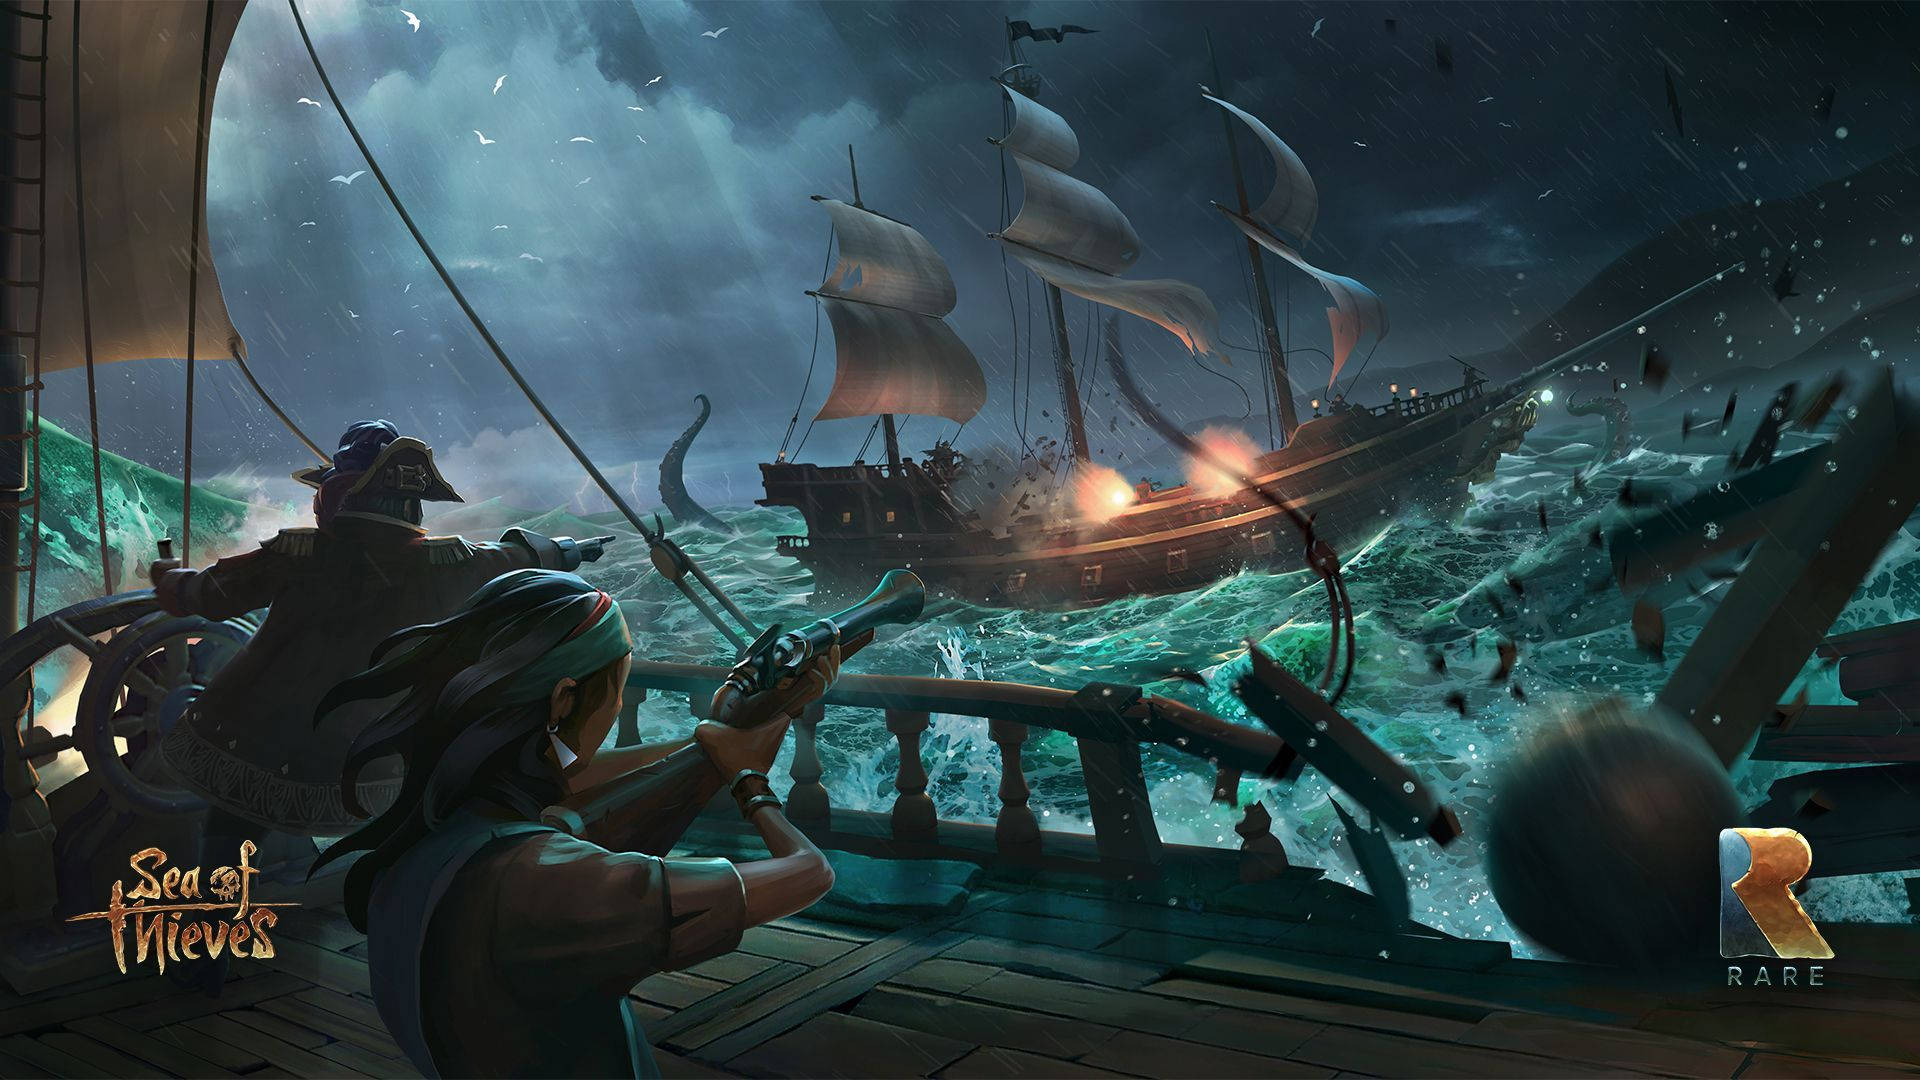 Sea Of Thieves Background